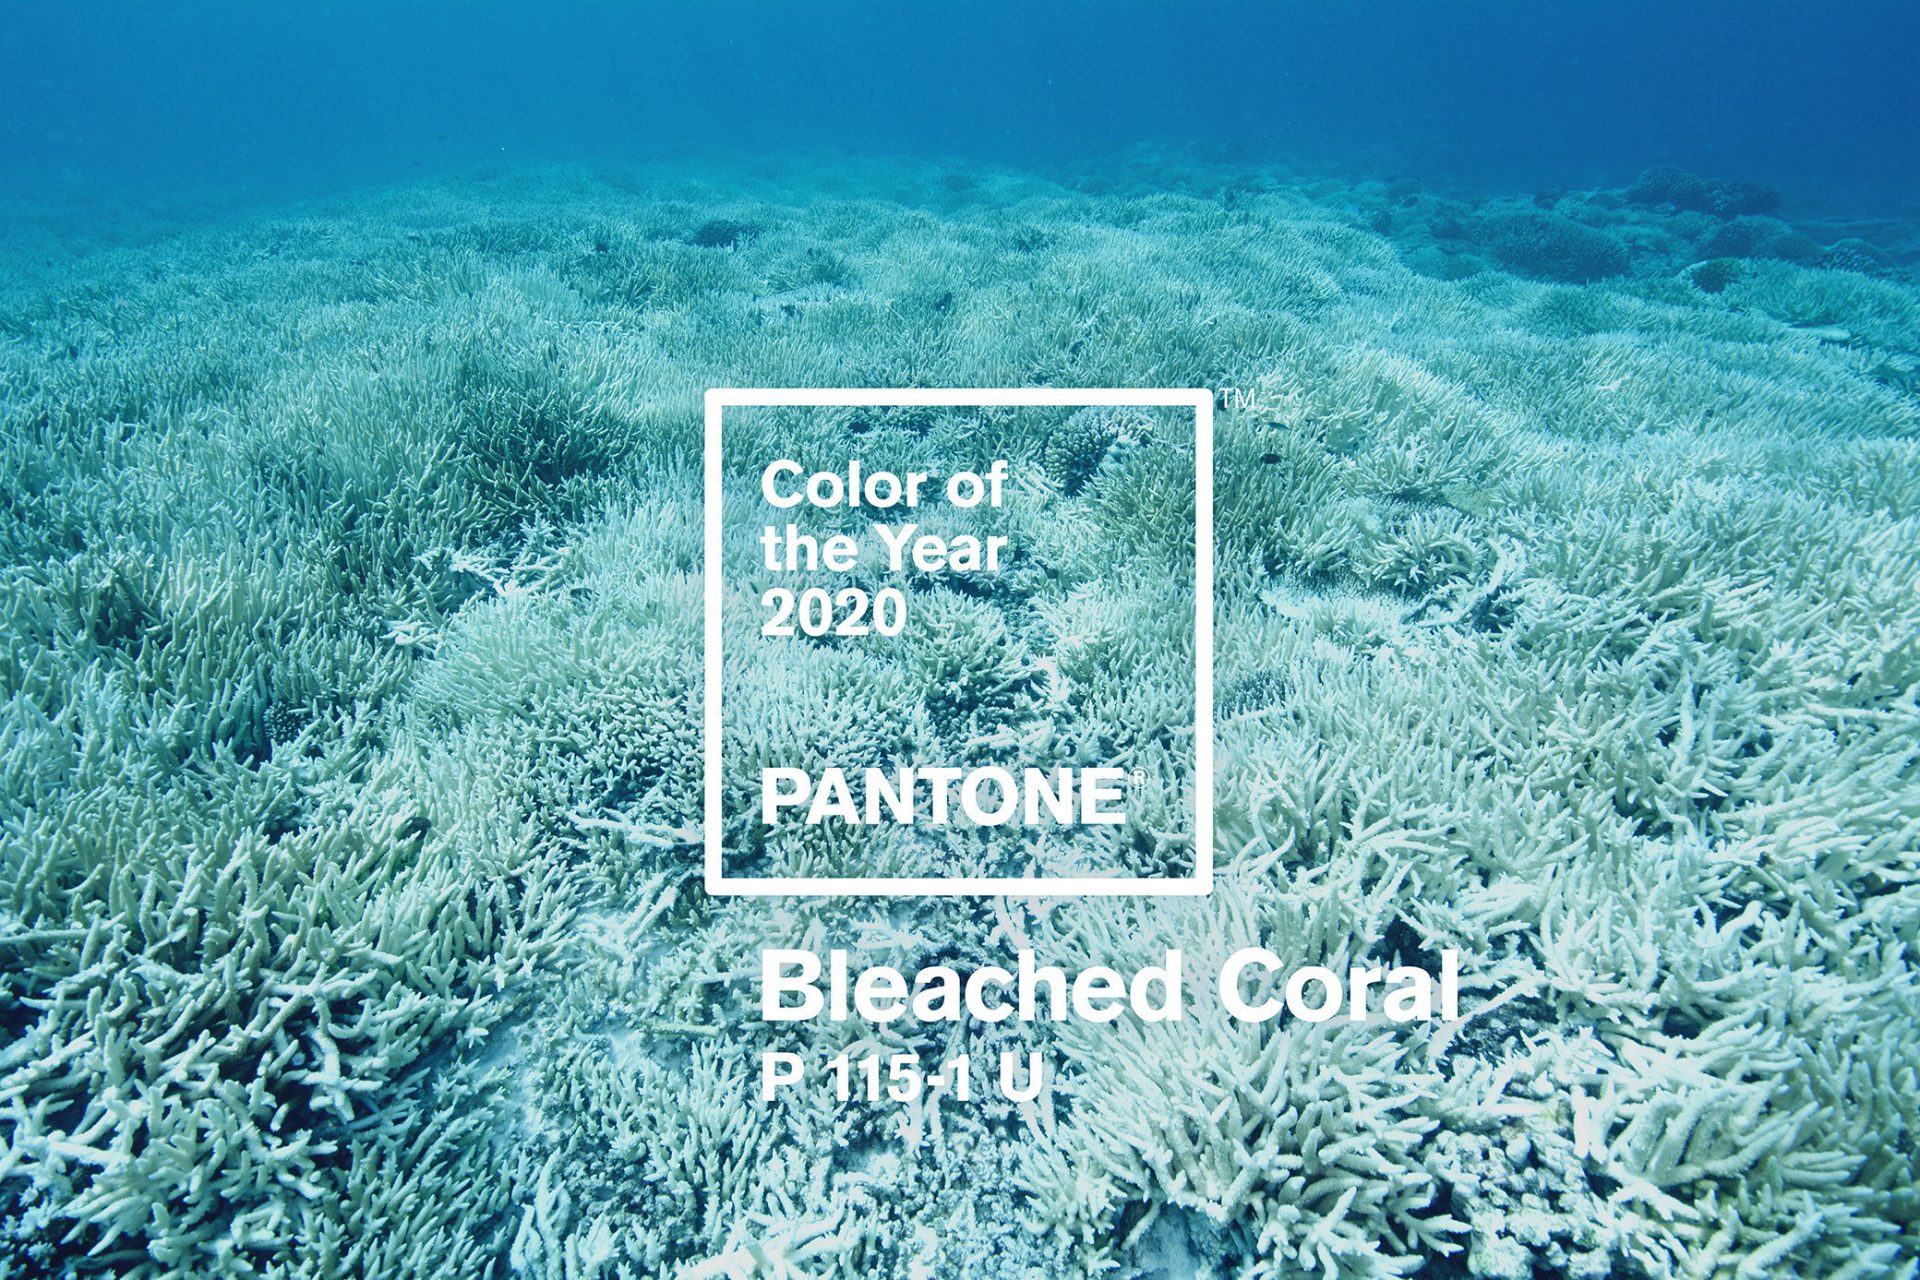 Bleached coral colour of the year